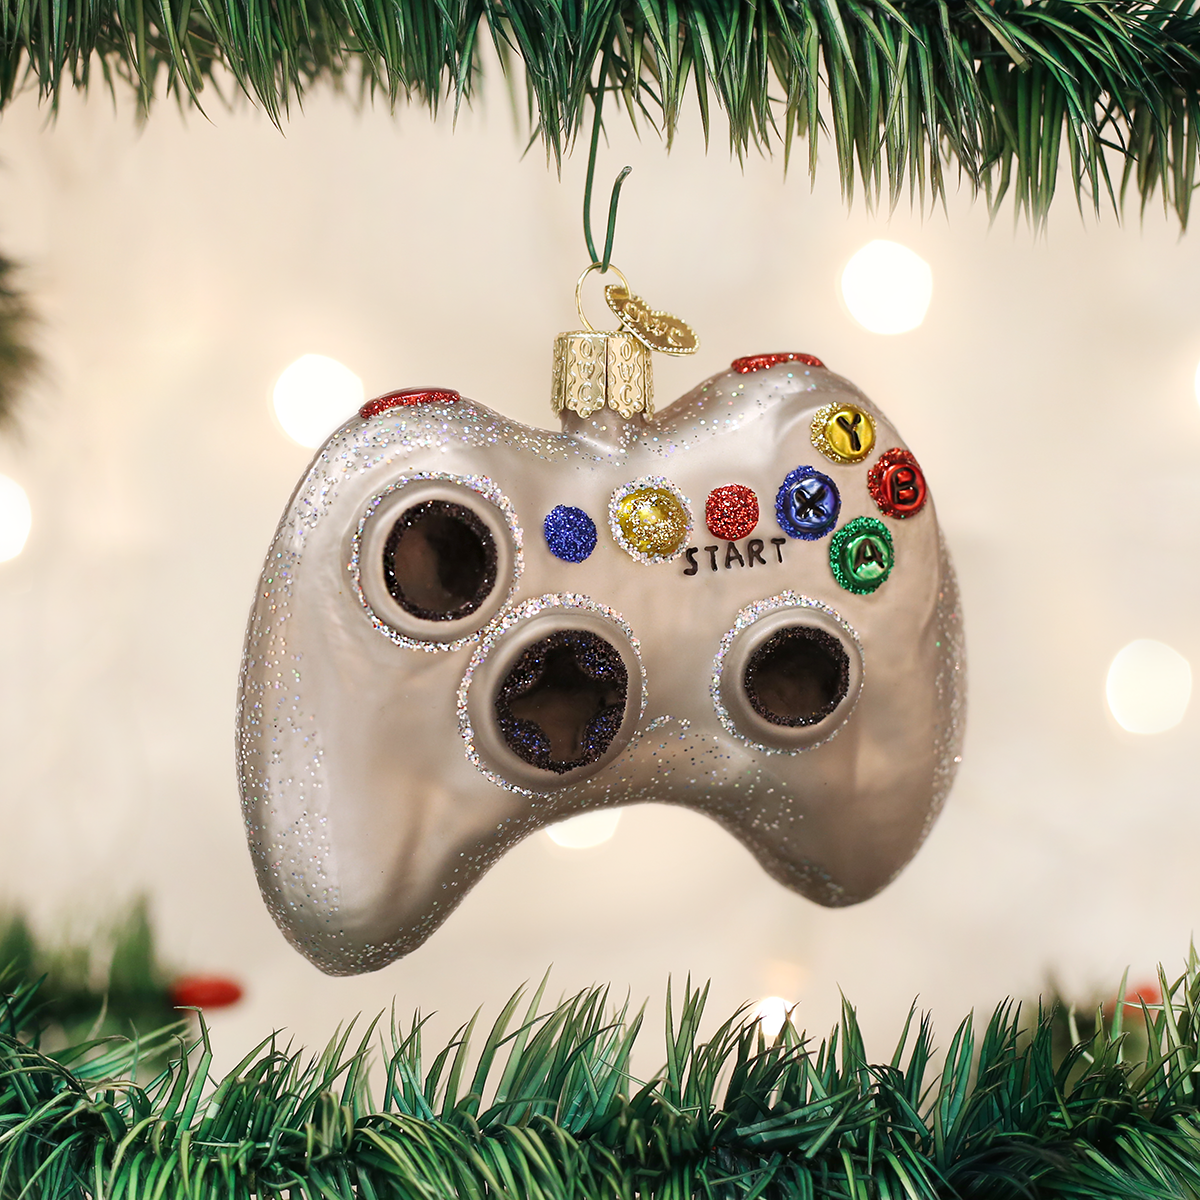 Old World Christmas - Video Game Controller Ornament    